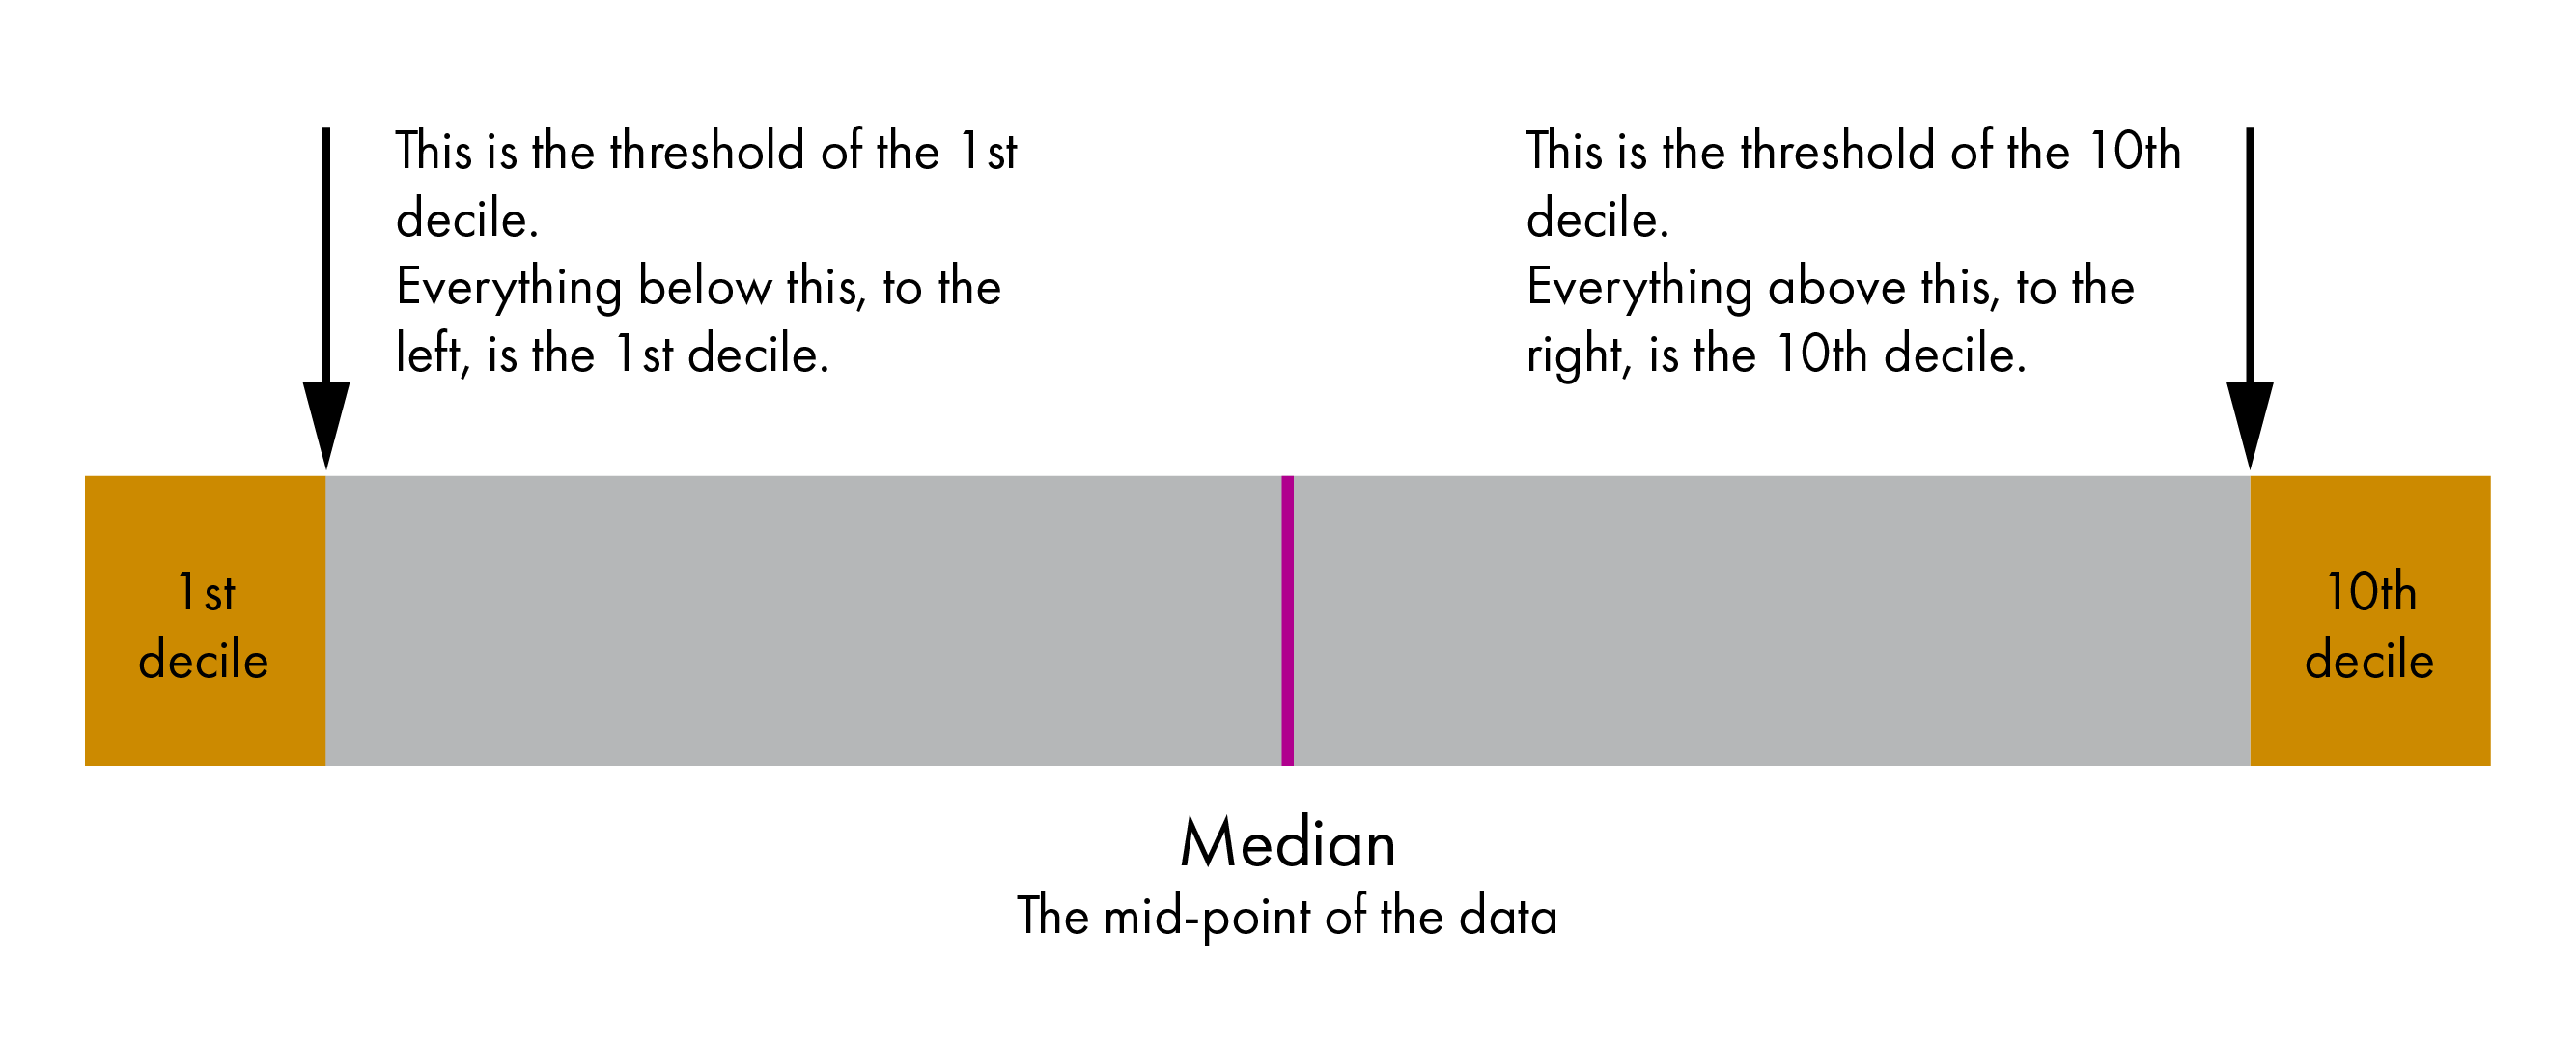 A horizontal bar chart showing where the median and the thresholds for the first and tenth deciles are.